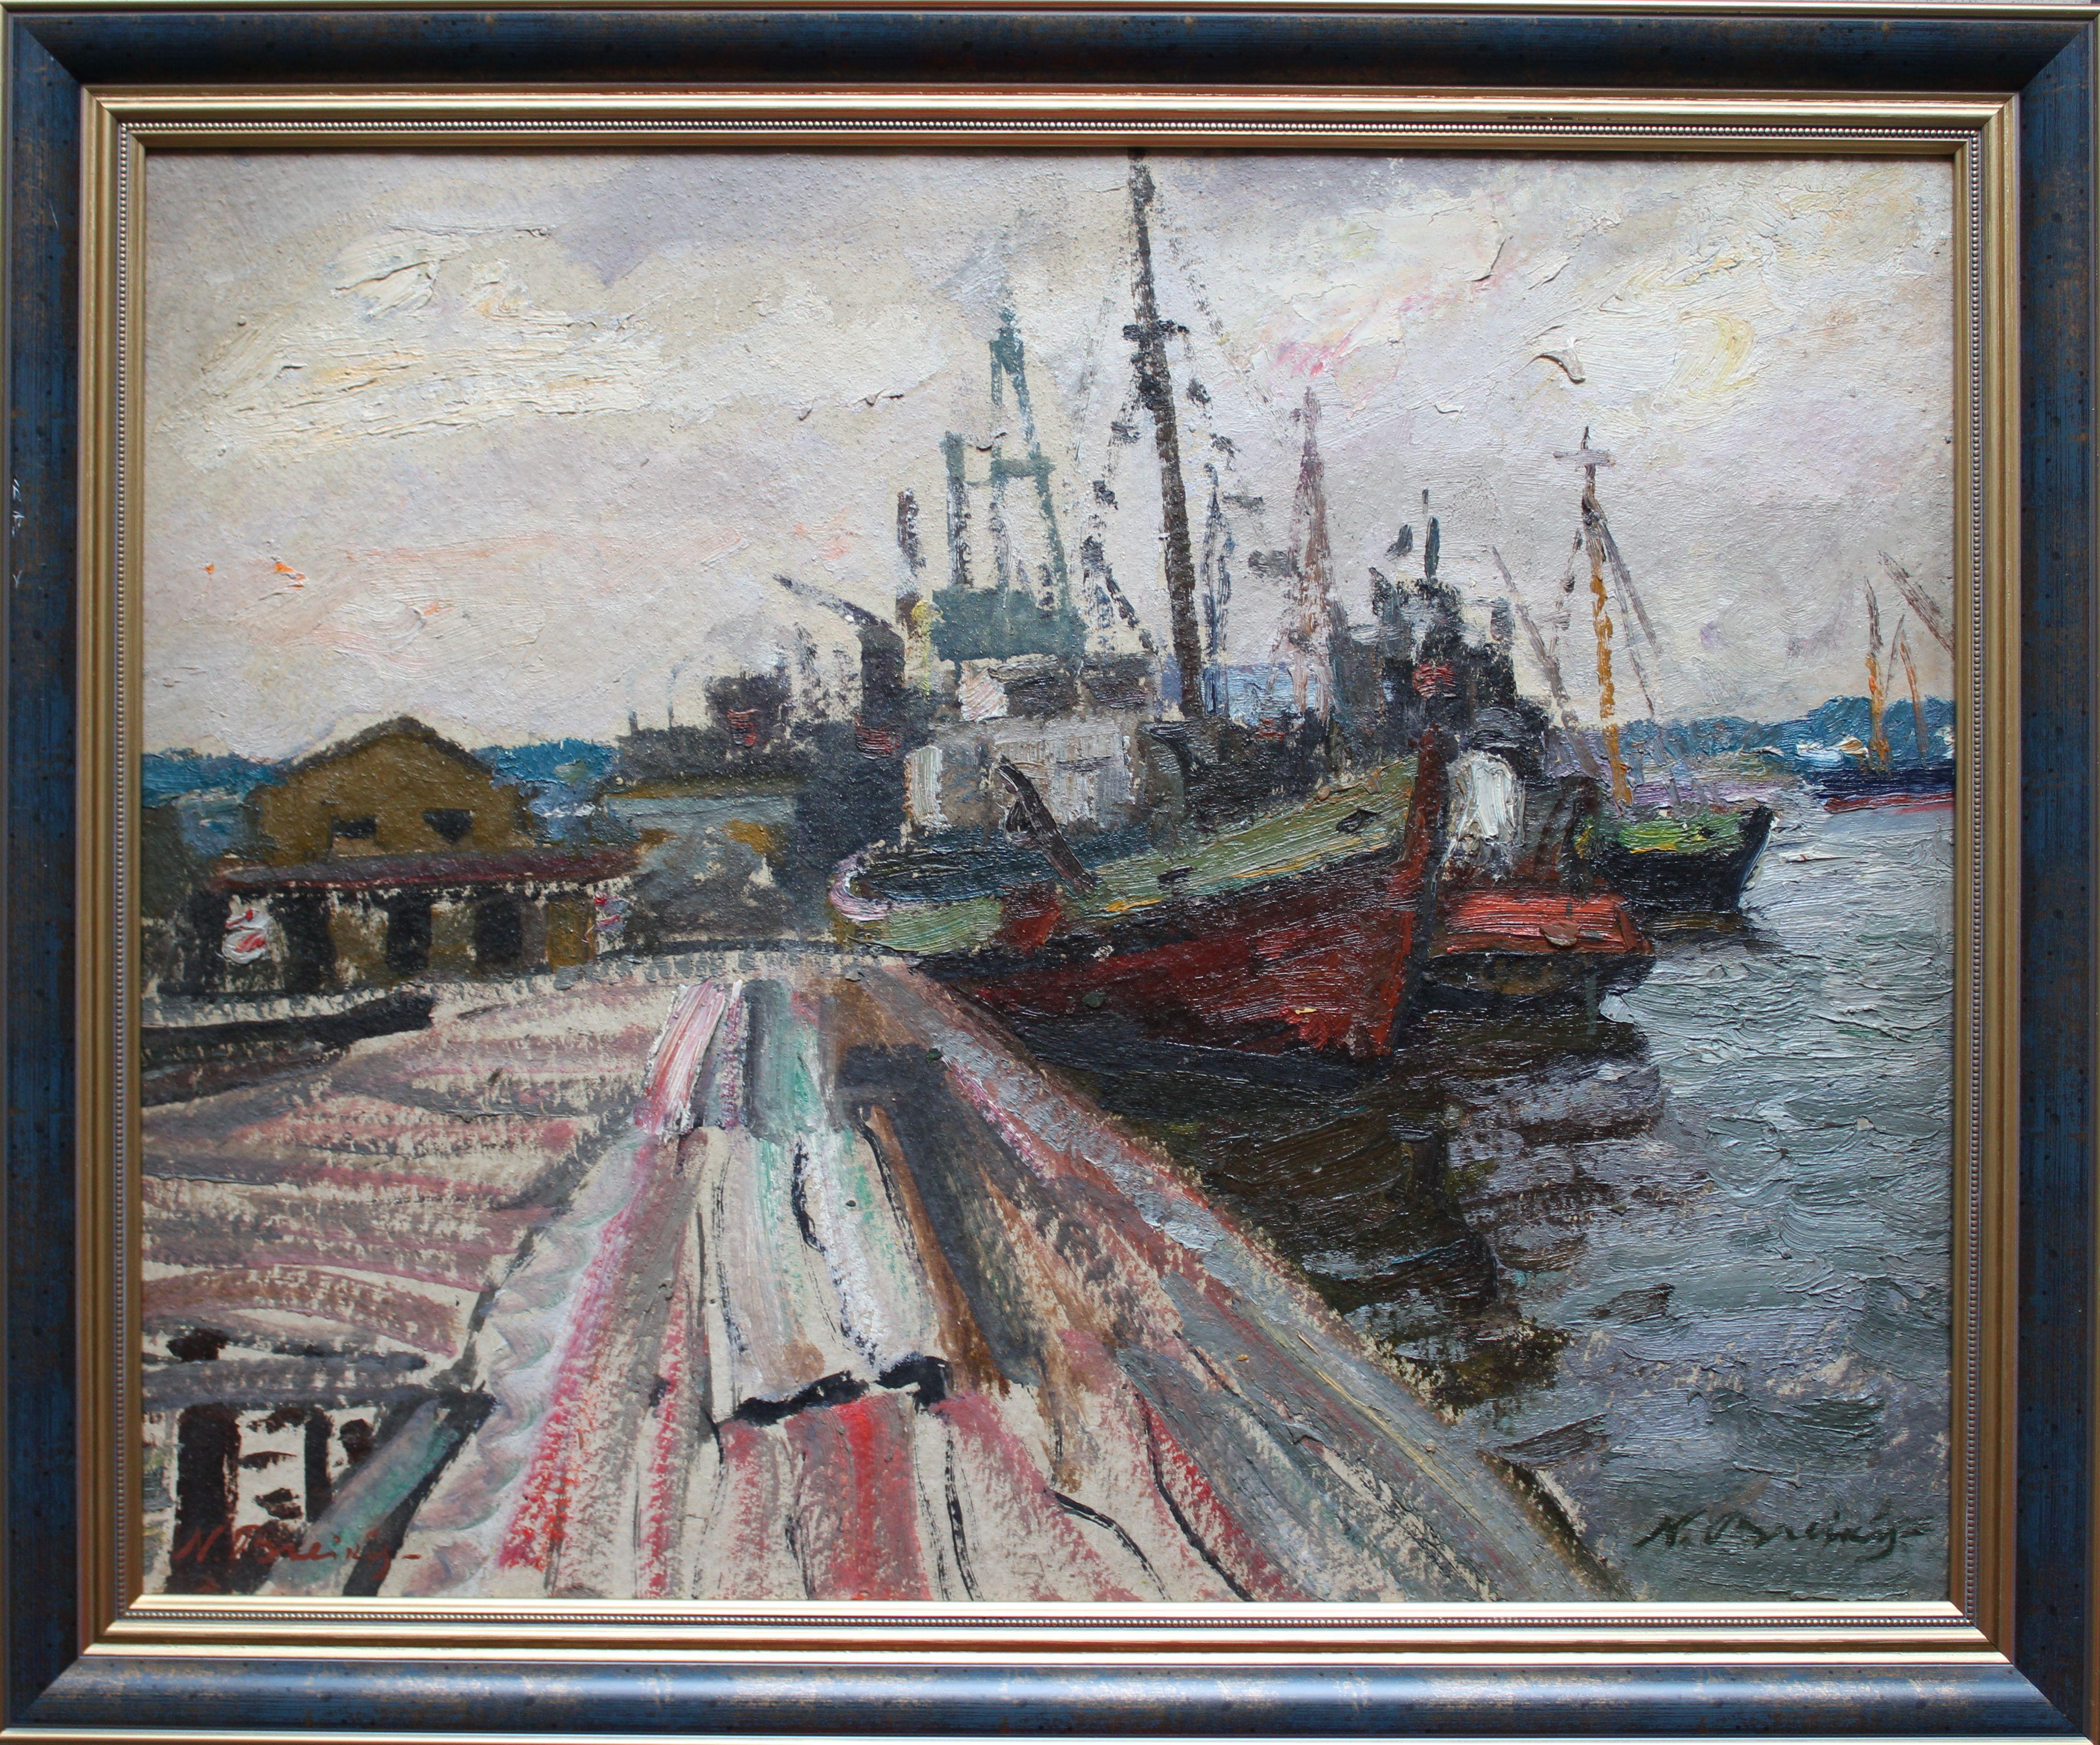 At the Port. 1966, oil on cardboard, 56x69, 5 cm - Gray Landscape Painting by Nikolajs Breikss 